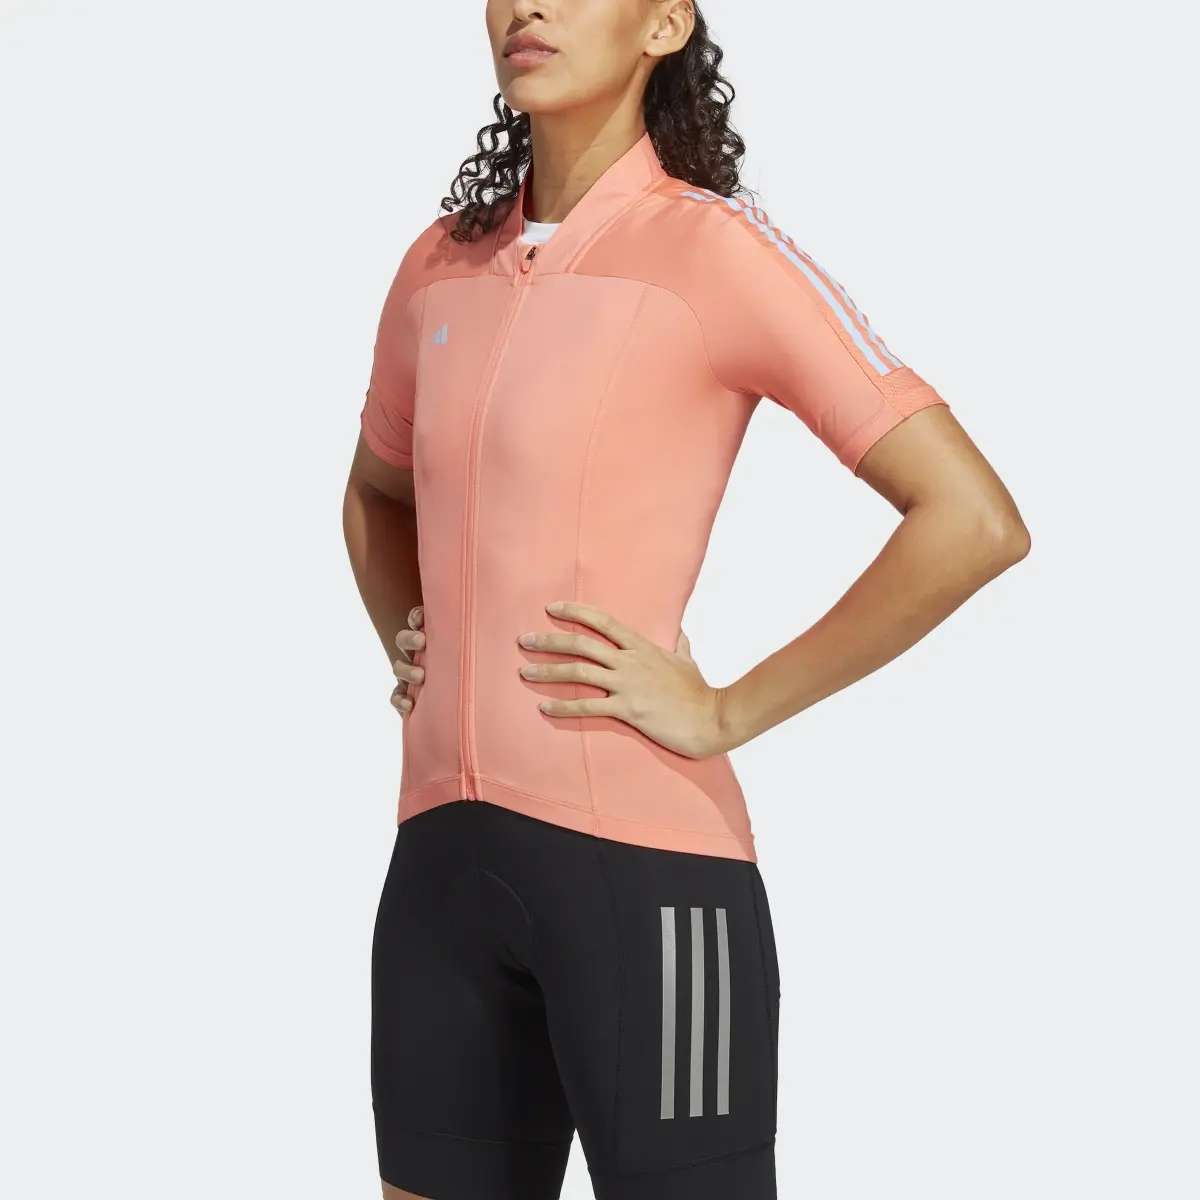 Adidas The Short Sleeve Cycling Jersey. 1